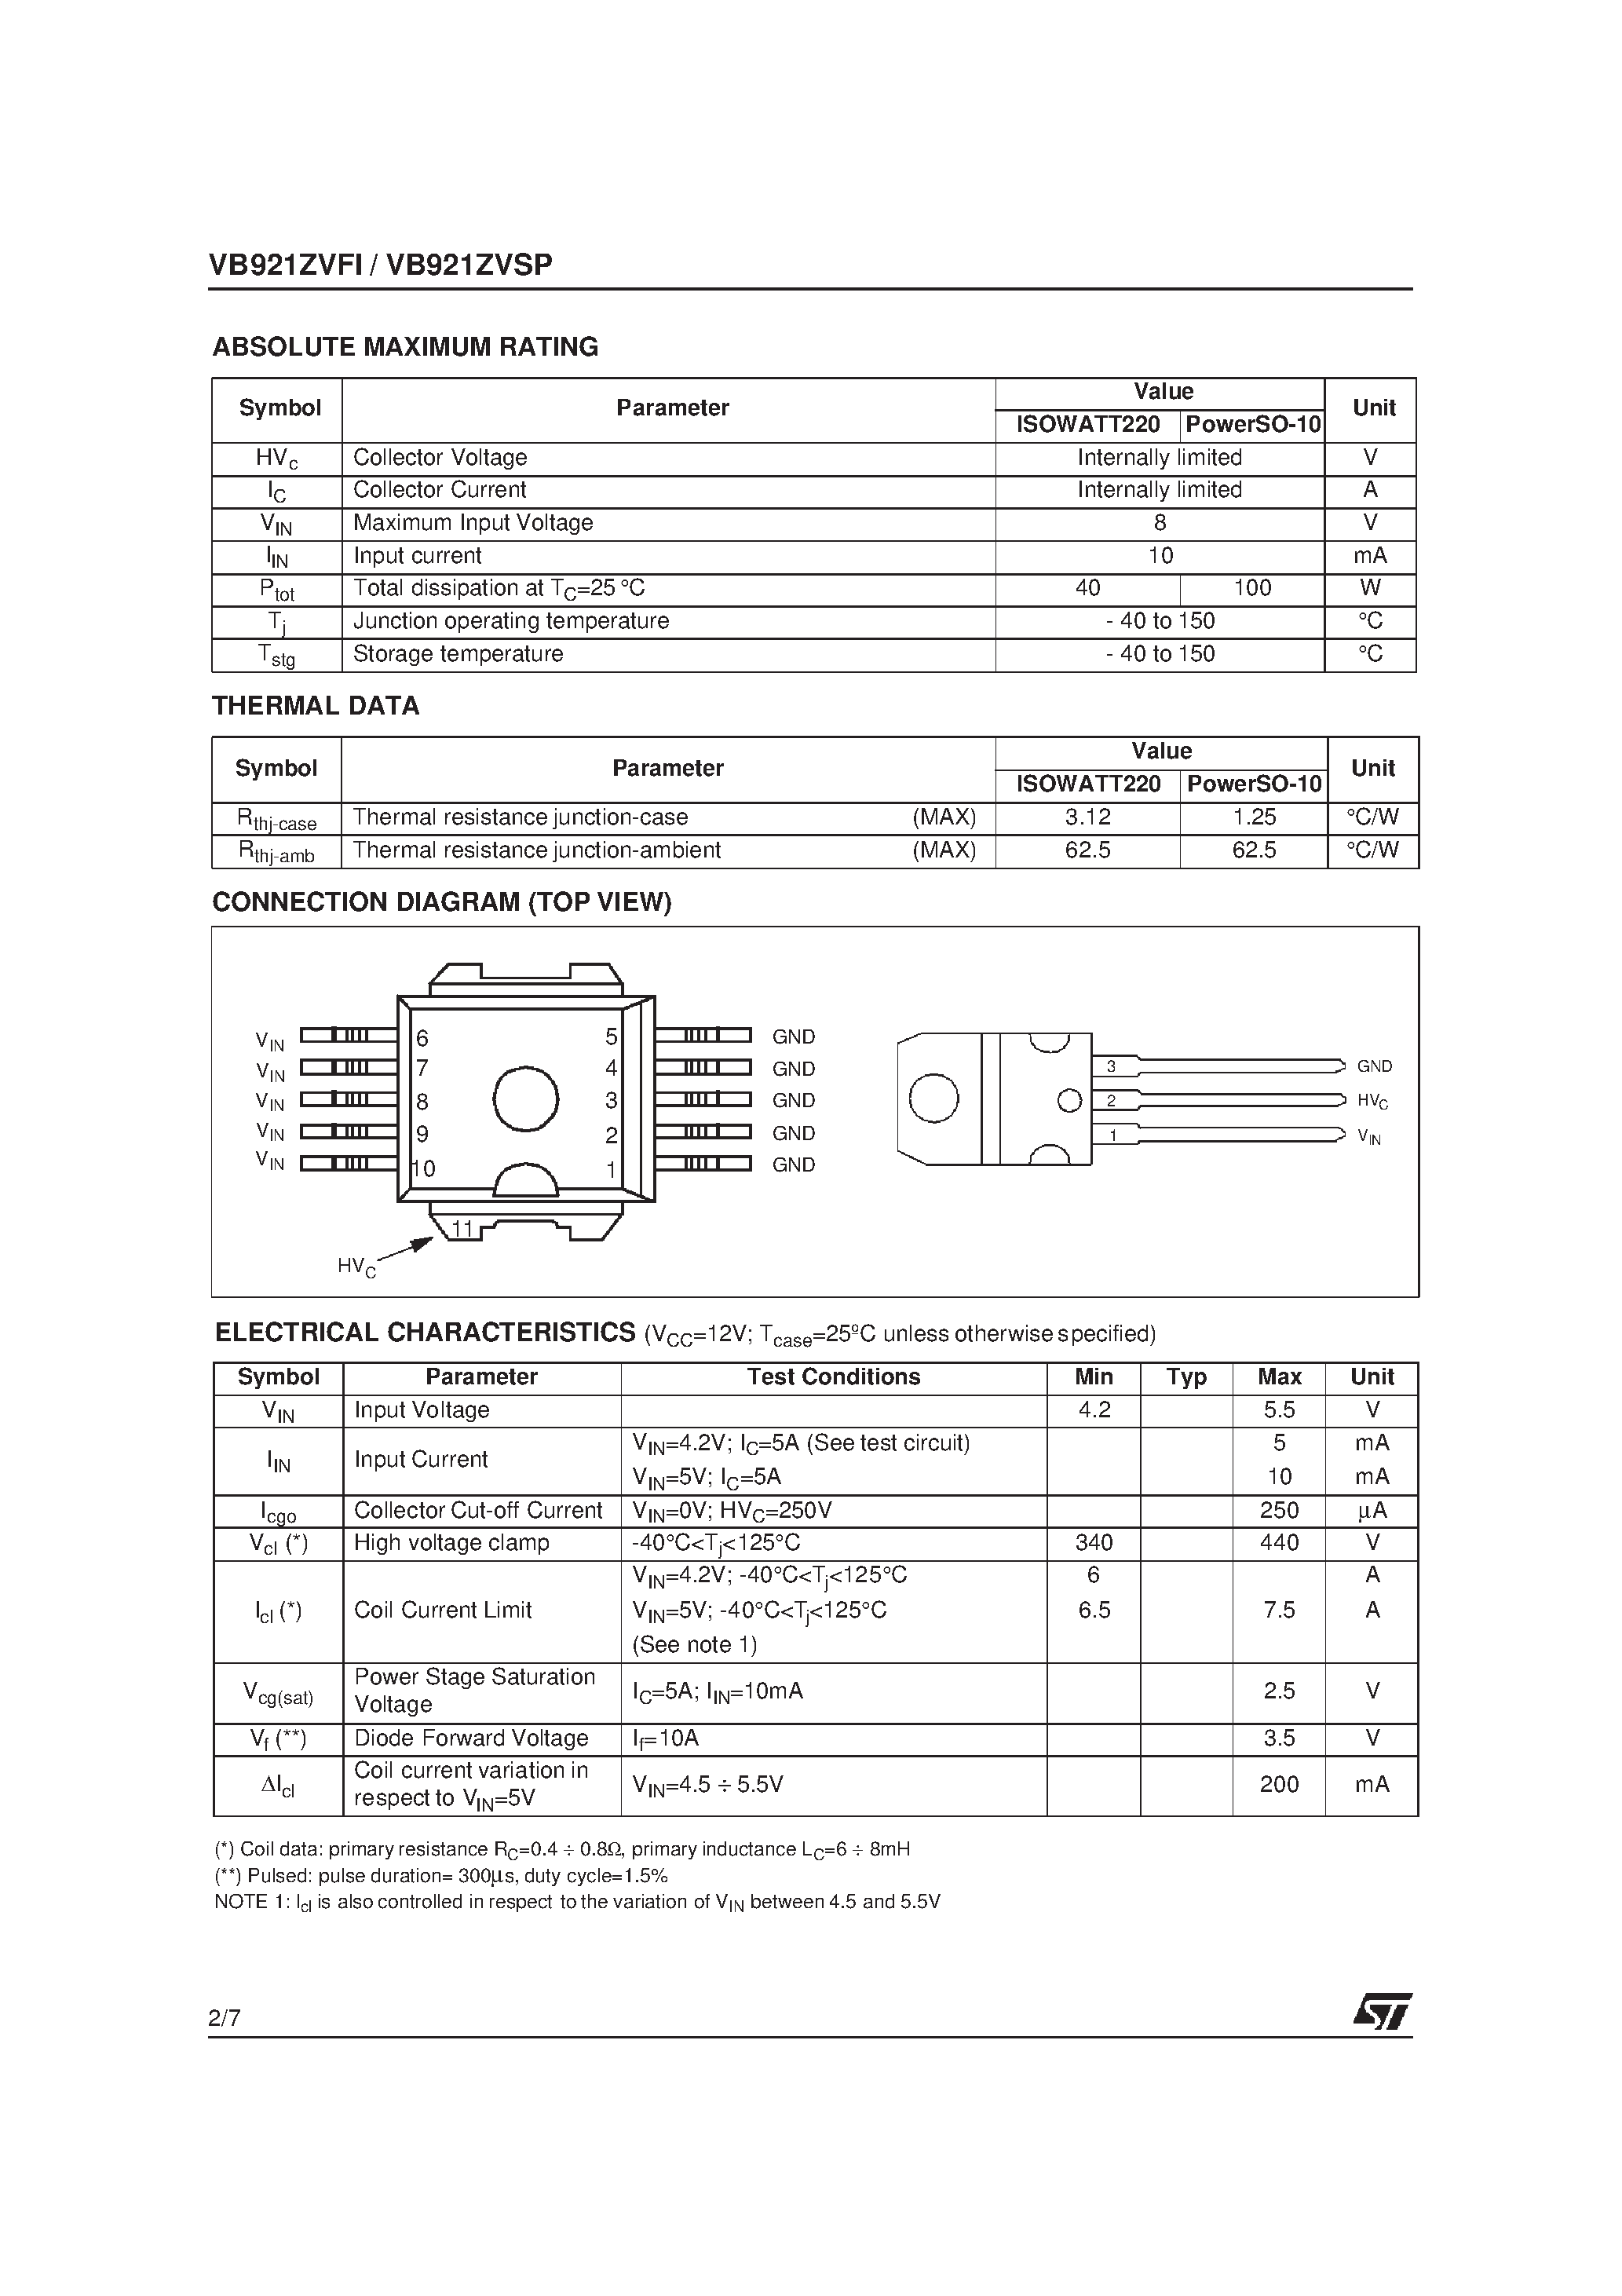 Datasheet VB921ZVSP - HIGH VOLTAGE IGNITION COIL DRIVER POWER I.C. page 2